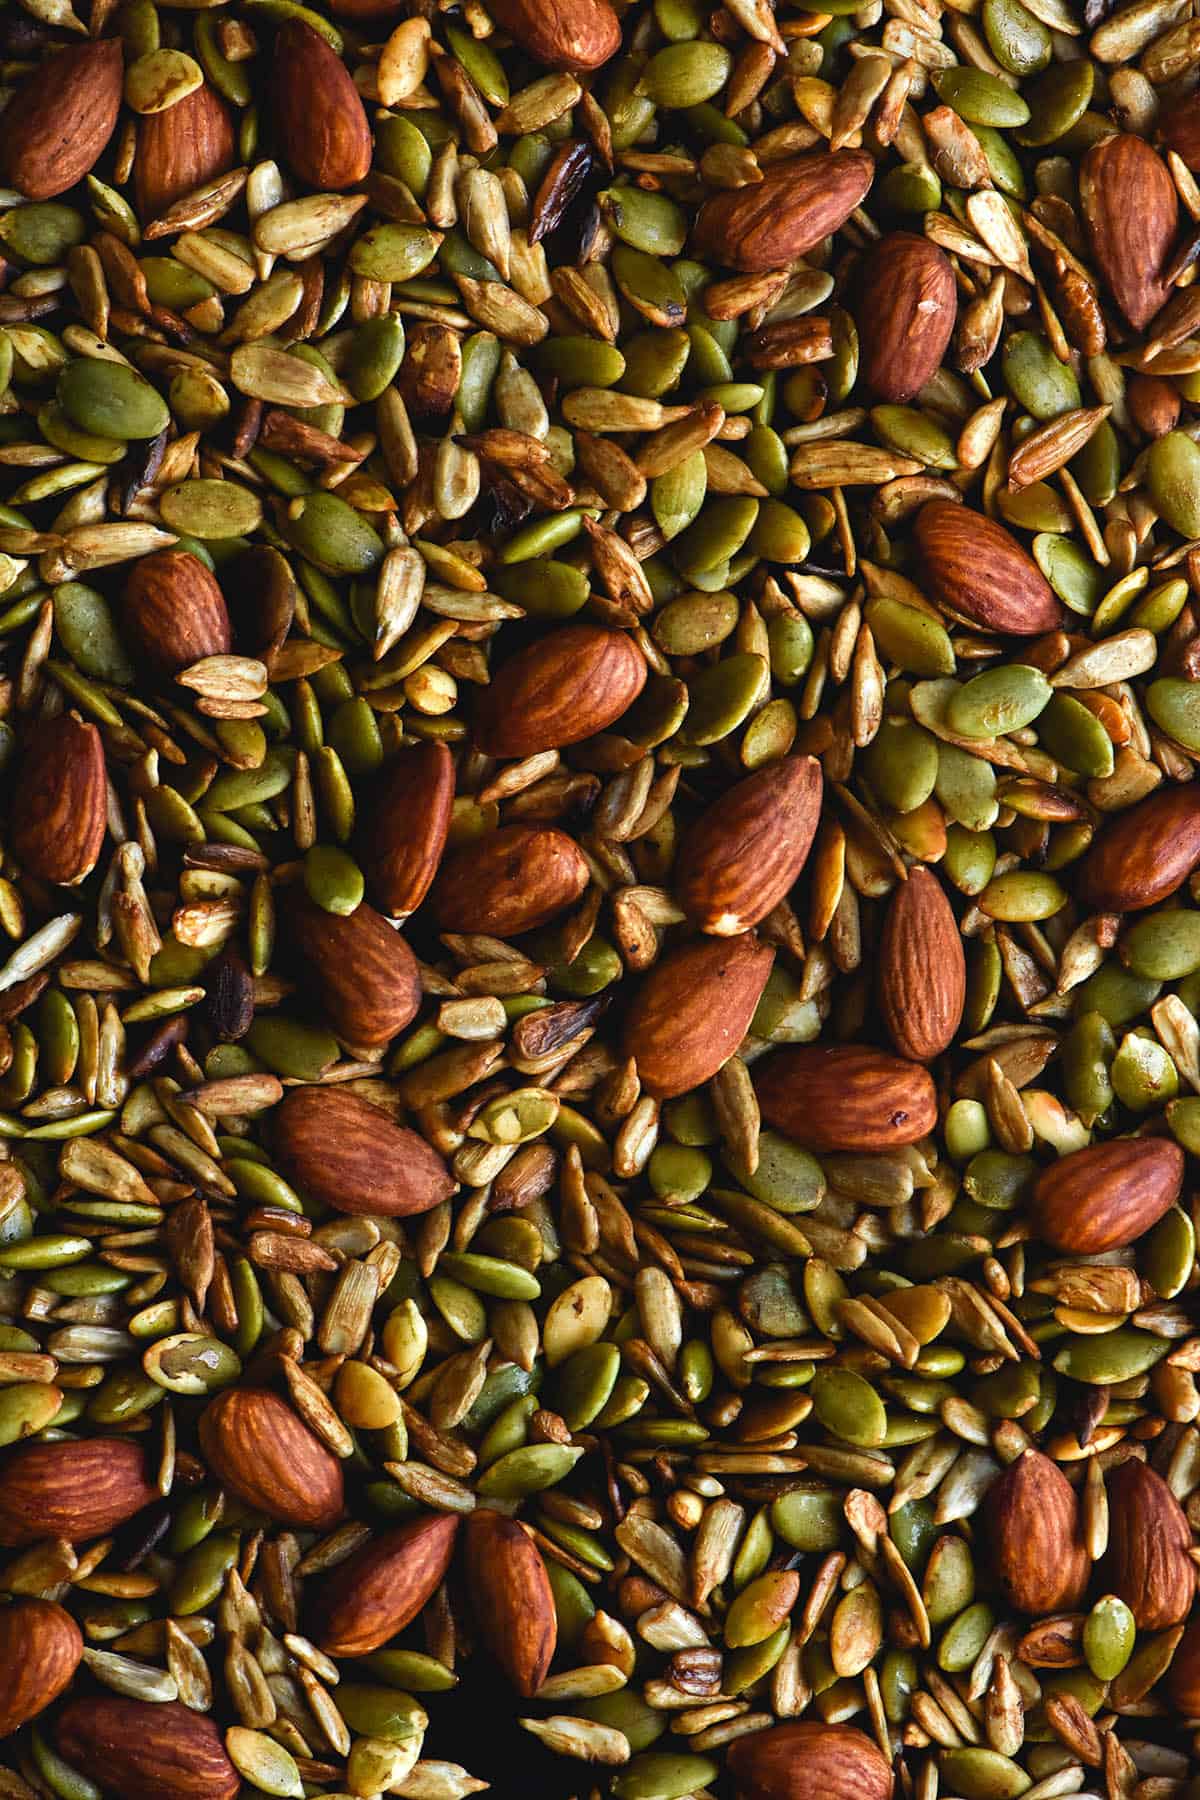 An aerial close up view of a tray of Tamari nut mix made up of toasted almonds, sunflowers and pepitas.